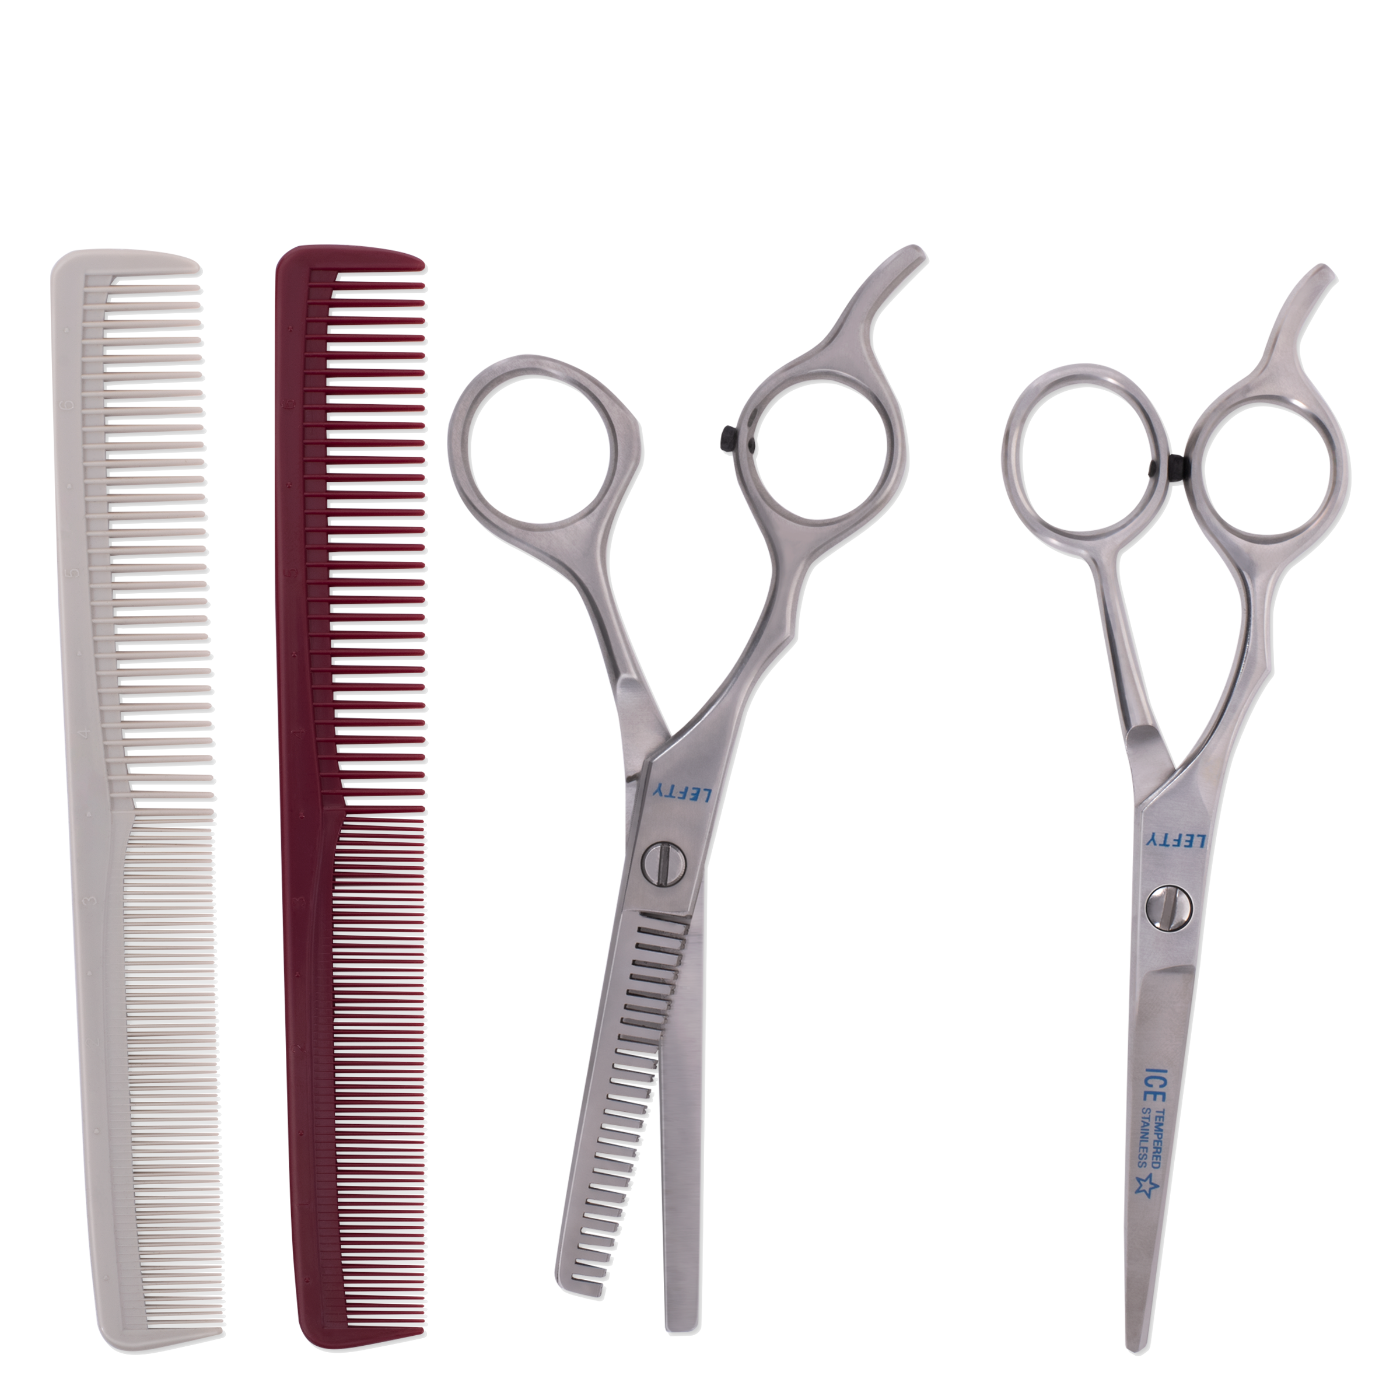 6" Cutting and Styling Kit, Left-Handed, 4 pc.